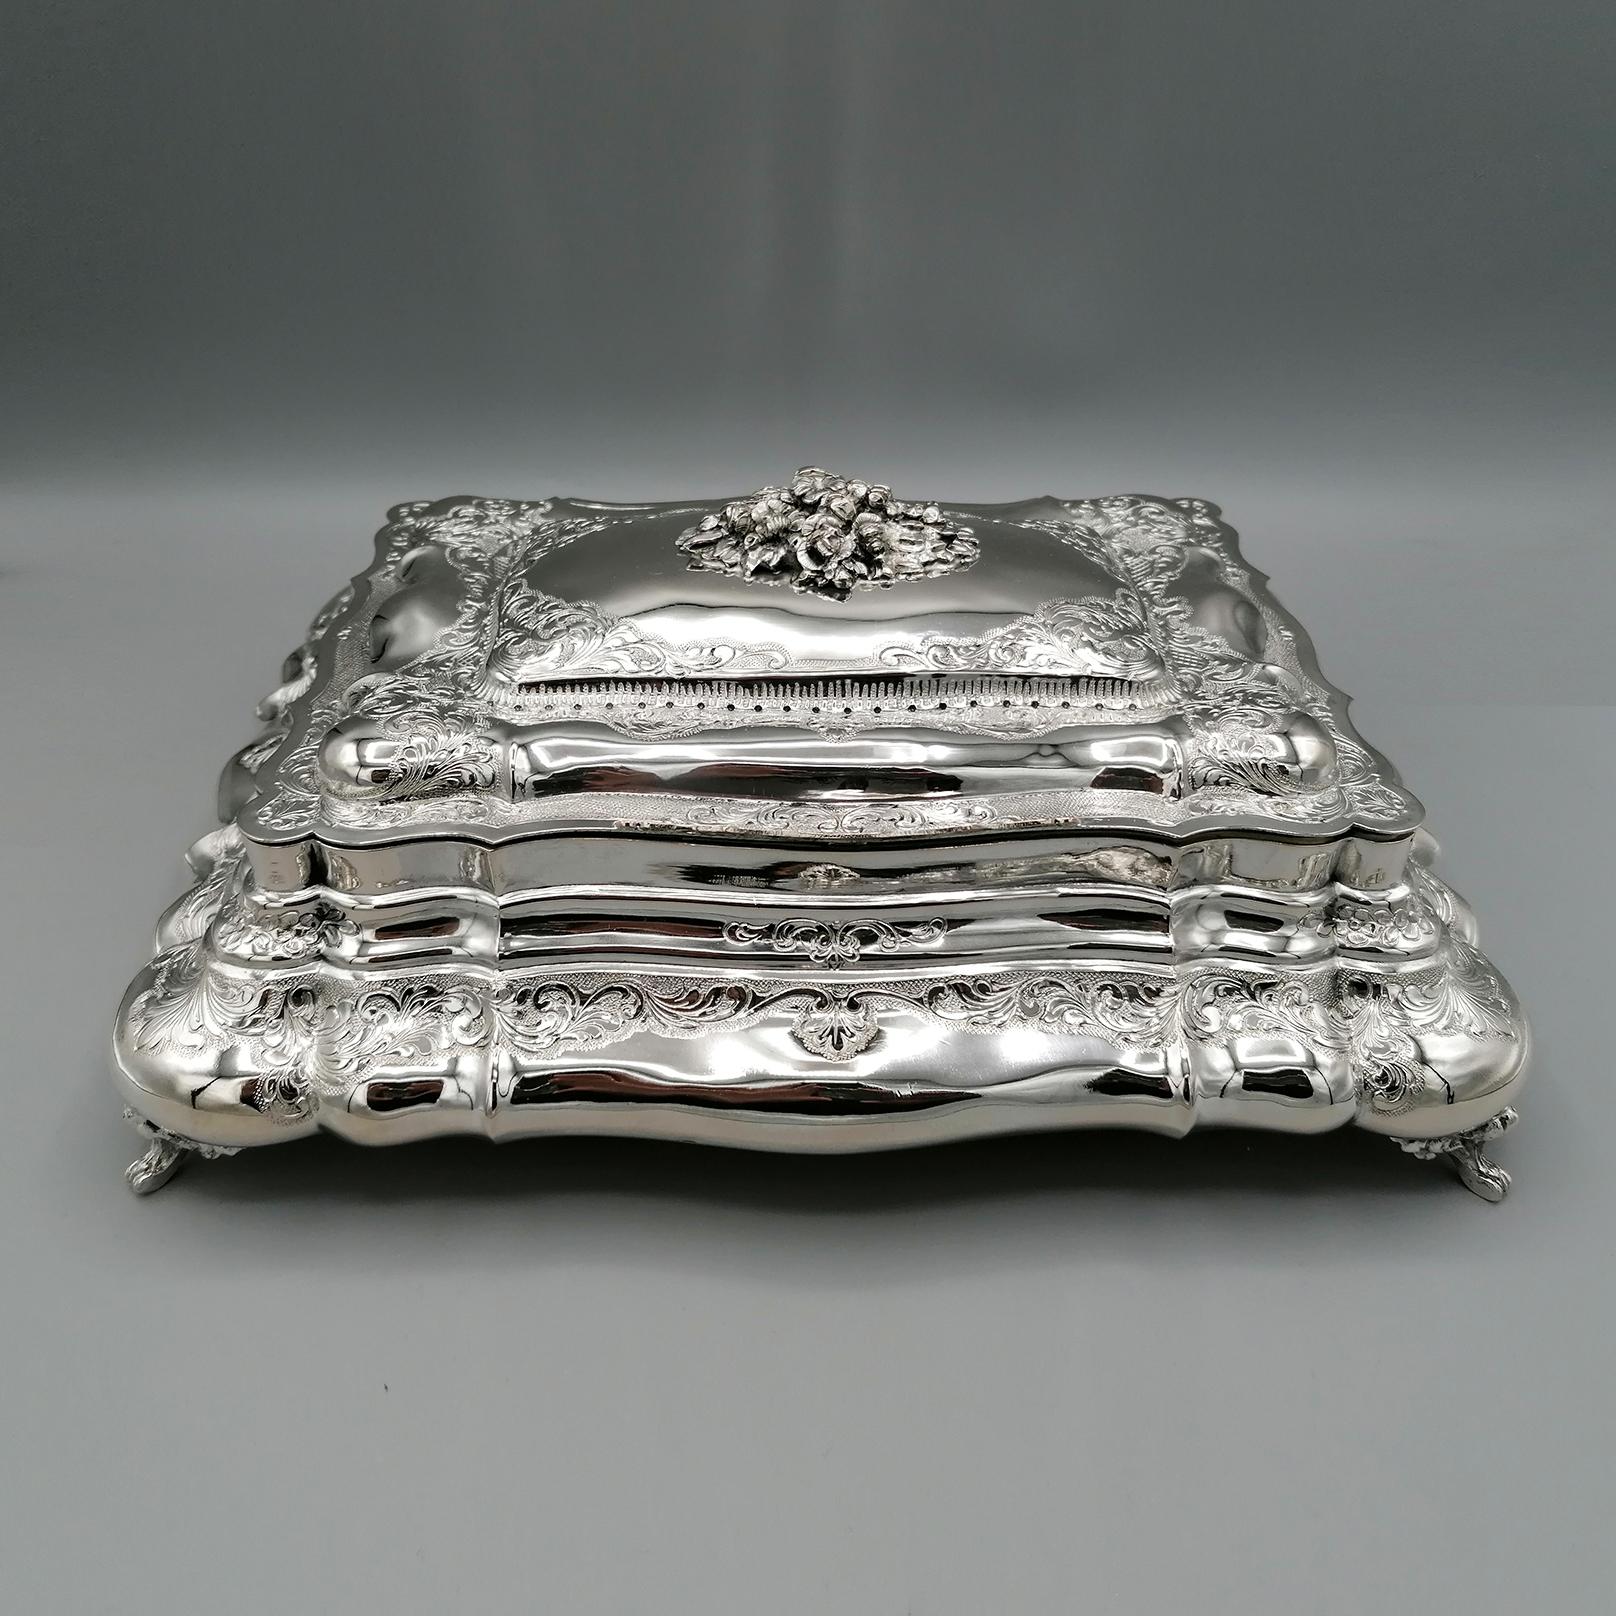 Important jewelry box made in Italy at the end of the 19th century.
Made entirely by hand from silver sheet and shaped. The whole body has been embossed and engraved by hand with a scroll design typical of the Baroque period.
The high quality of